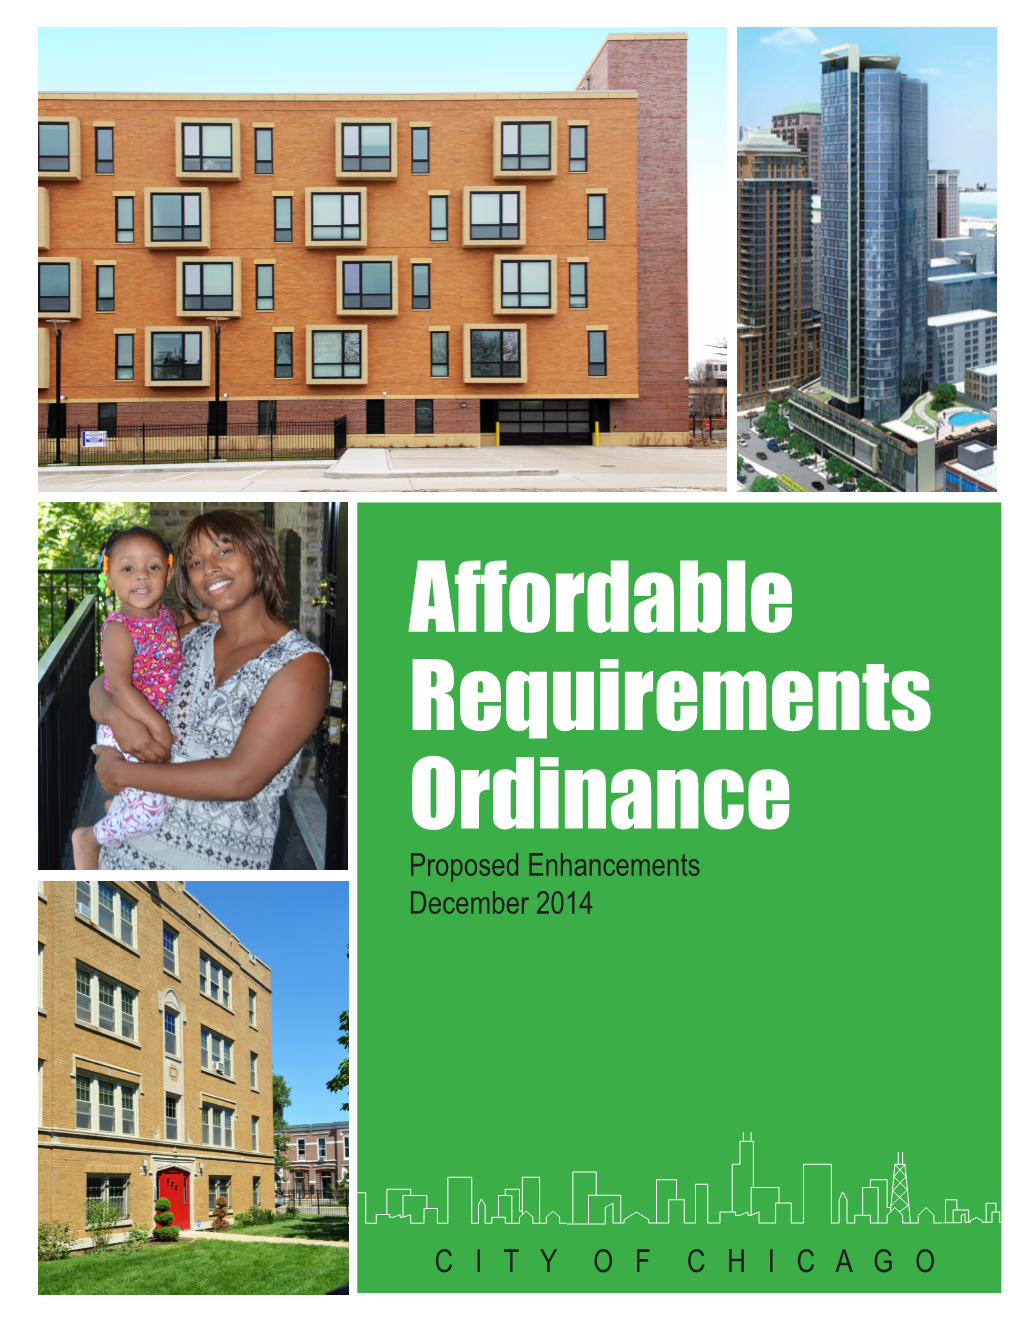 Affordable Requirements Ordinance Proposed Enhancements December 2014